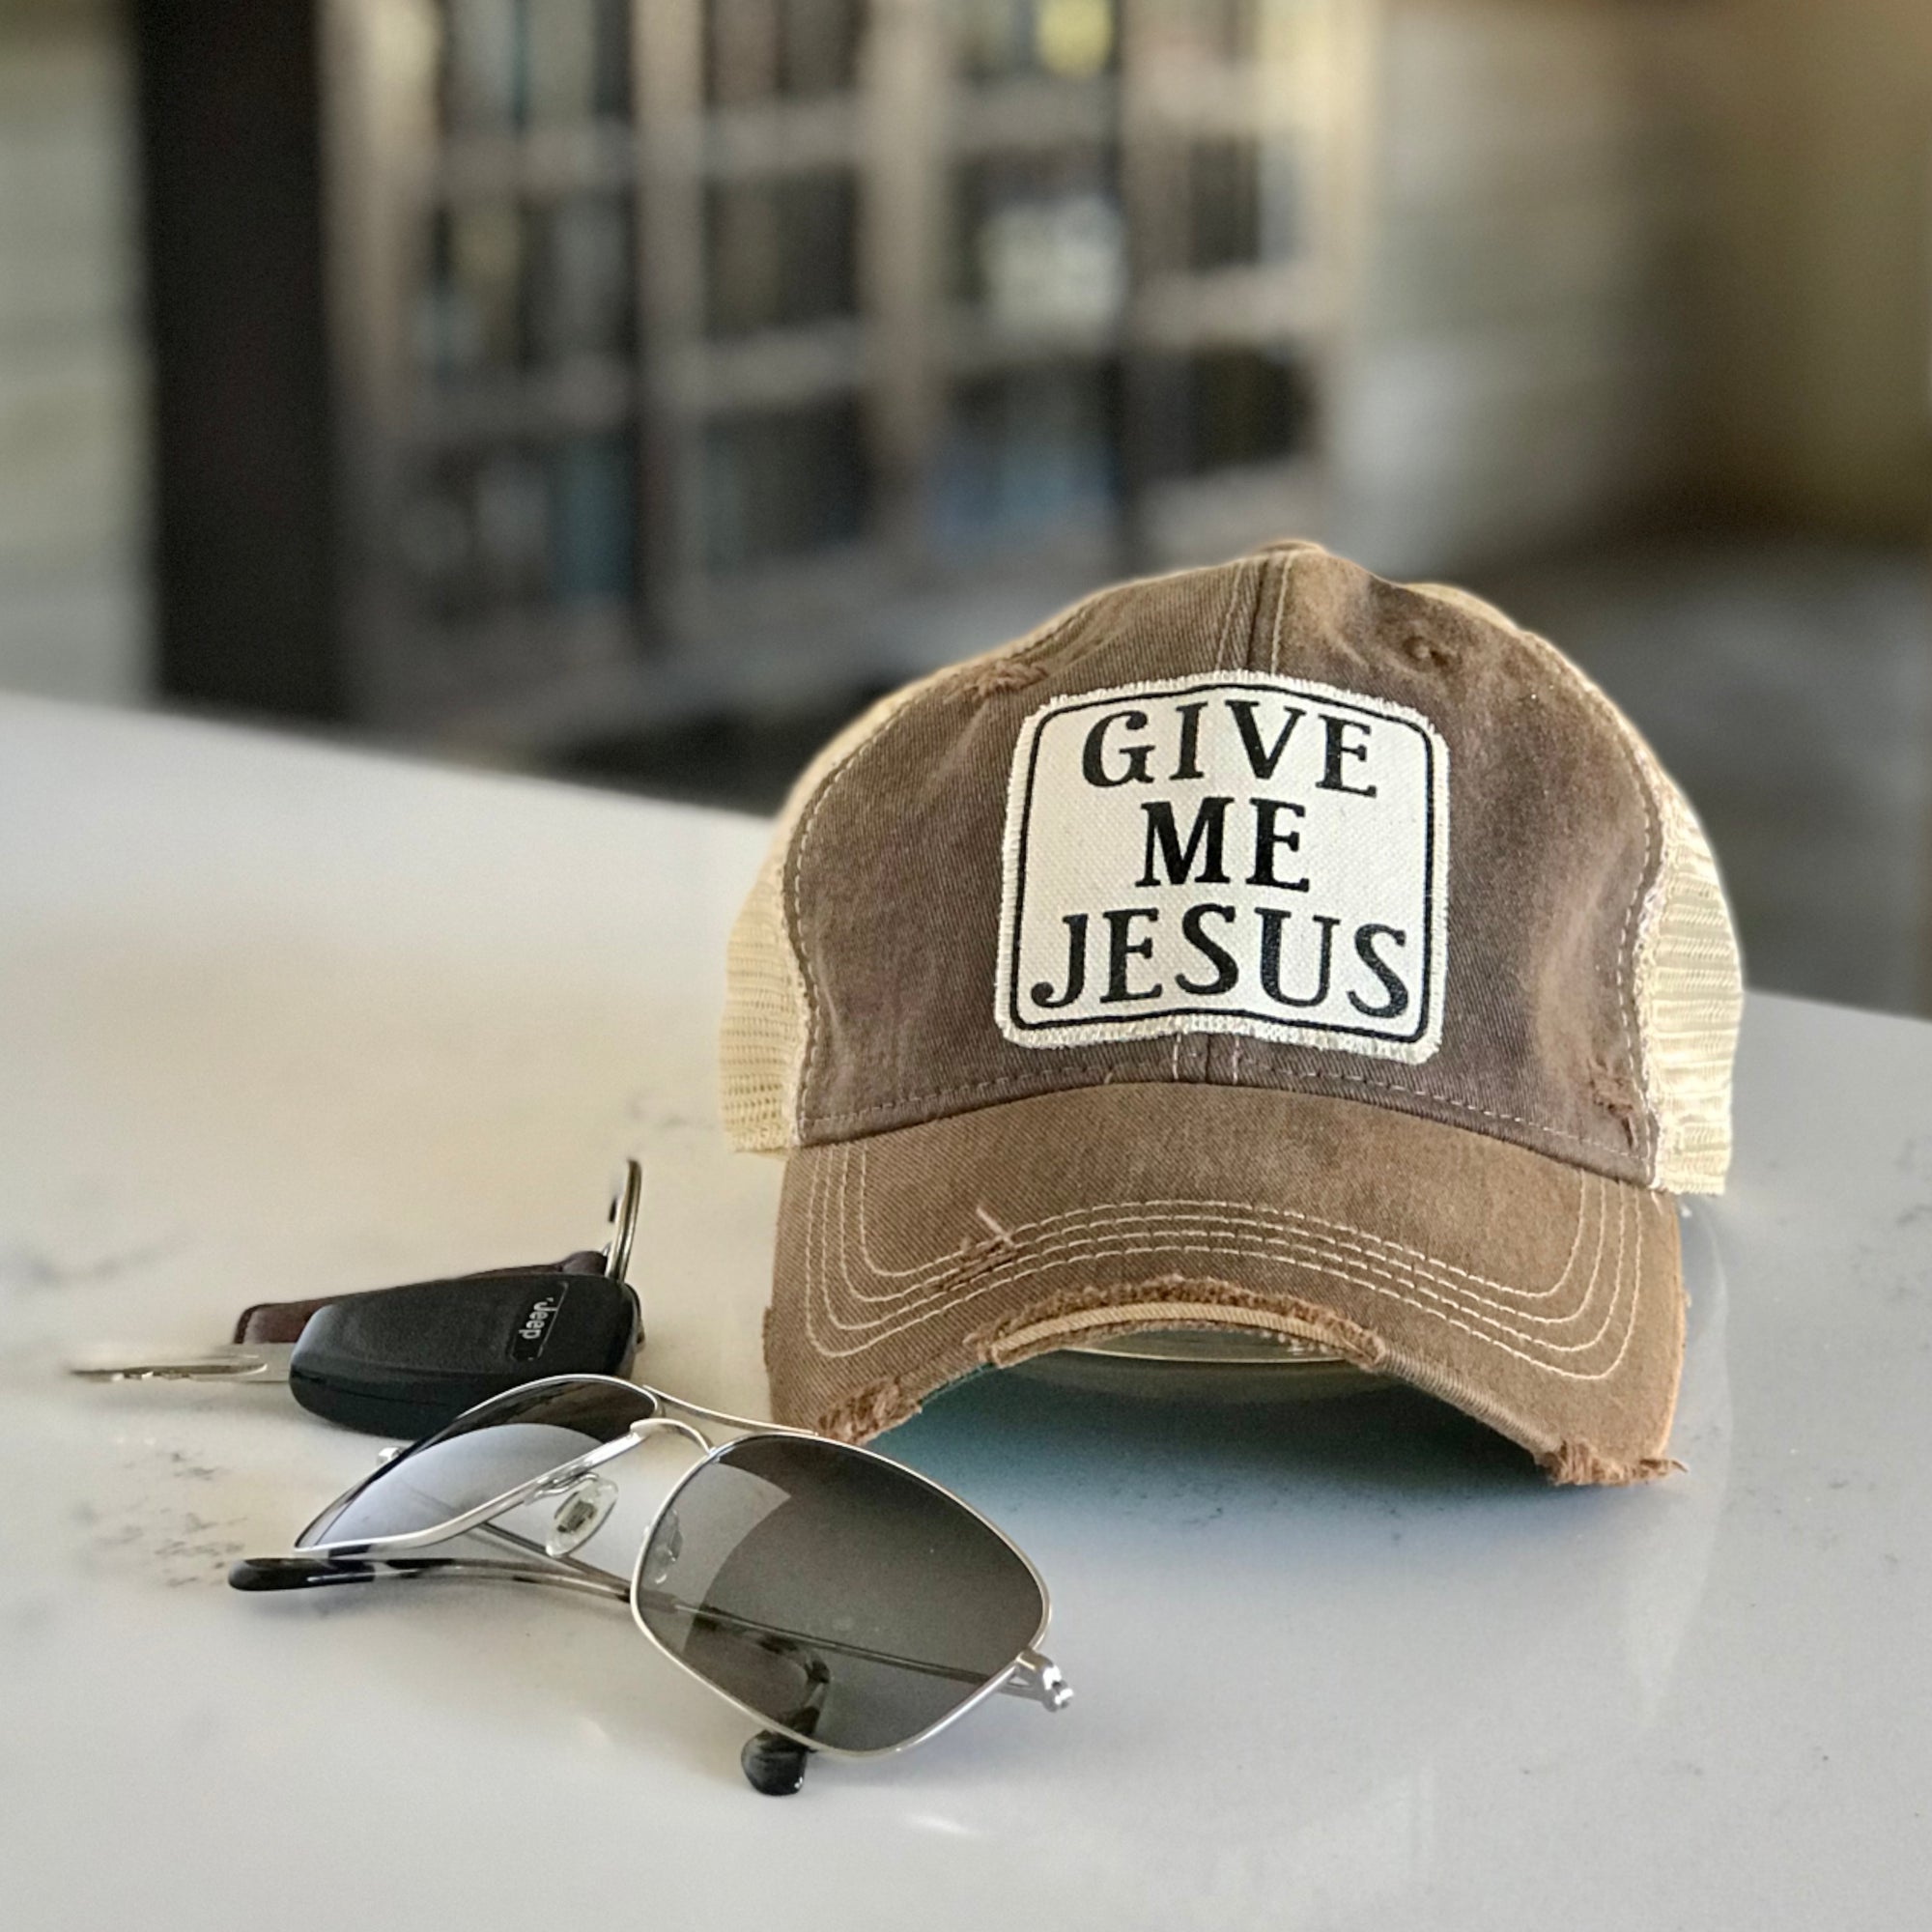 give me Jesus distressed trucker cap, give me Jesus vintage style trucker cap, give me Jesus distressed baseball cap, give me Jesus weather cap, give me Jesus baseball cap, mom hat,  give me Jesus mom cap